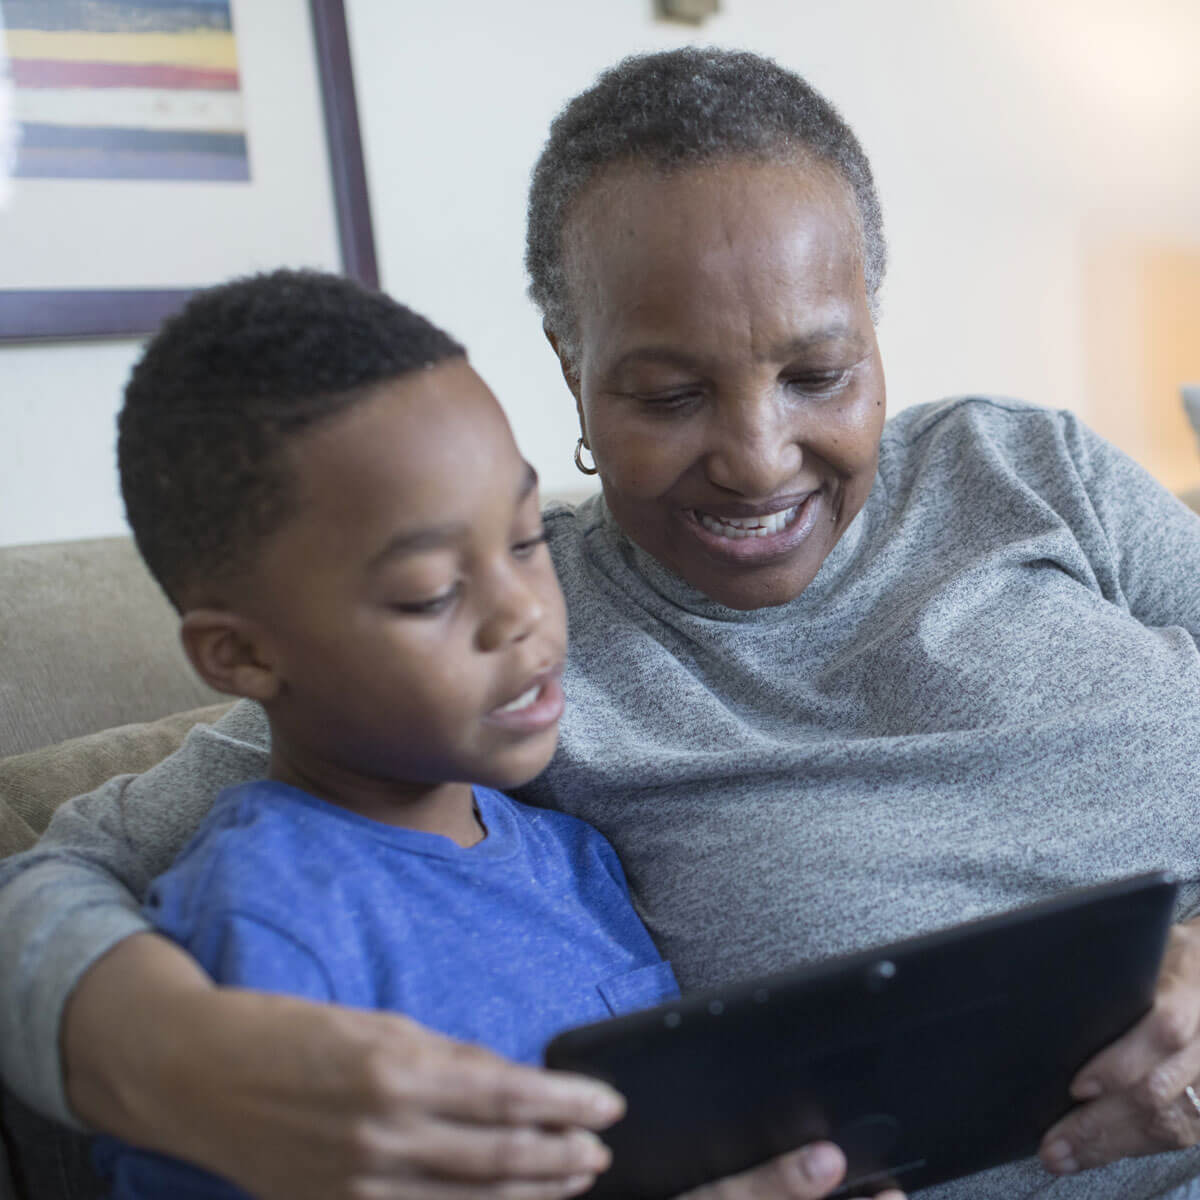 A grandmother and her grandson enjoy reading a book together on a couch.